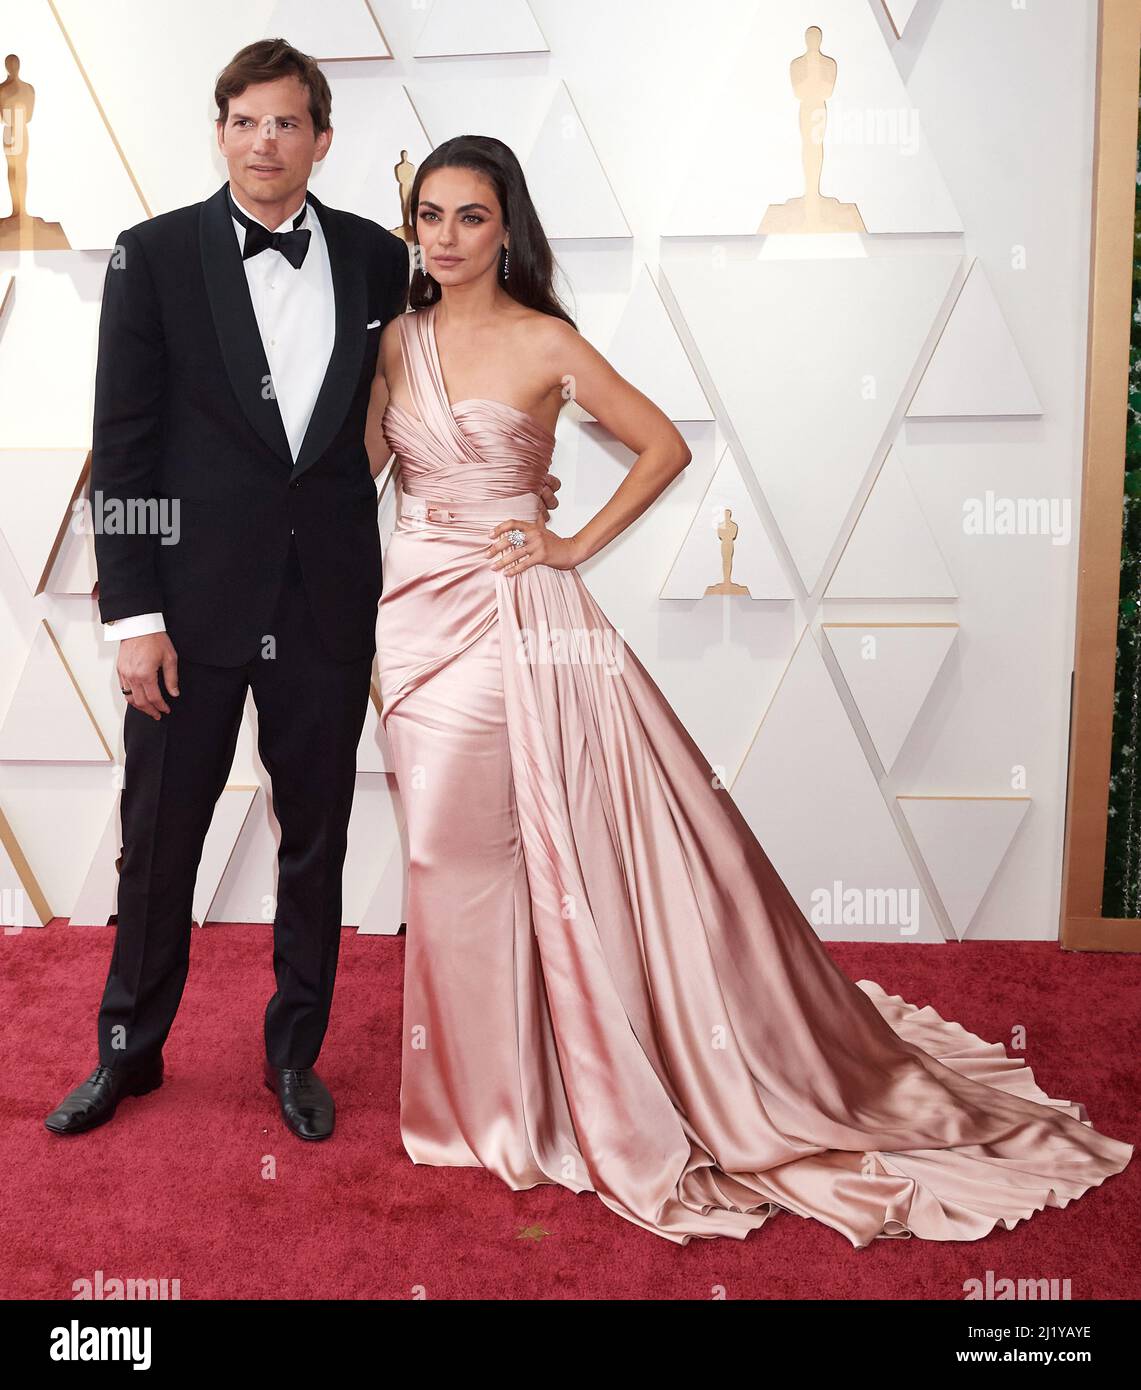 Ashton Kutcher and Mila Kunis arriving on the red carpet of the 94th Oscars at the Dolby Theatre at Ovation Hollywood in Los Angeles, CA, on Sunday, March 27, 2022. © A.M.P.A.S / AFF-USA.COM Credit: AFF/Alamy Live News Stock Photo